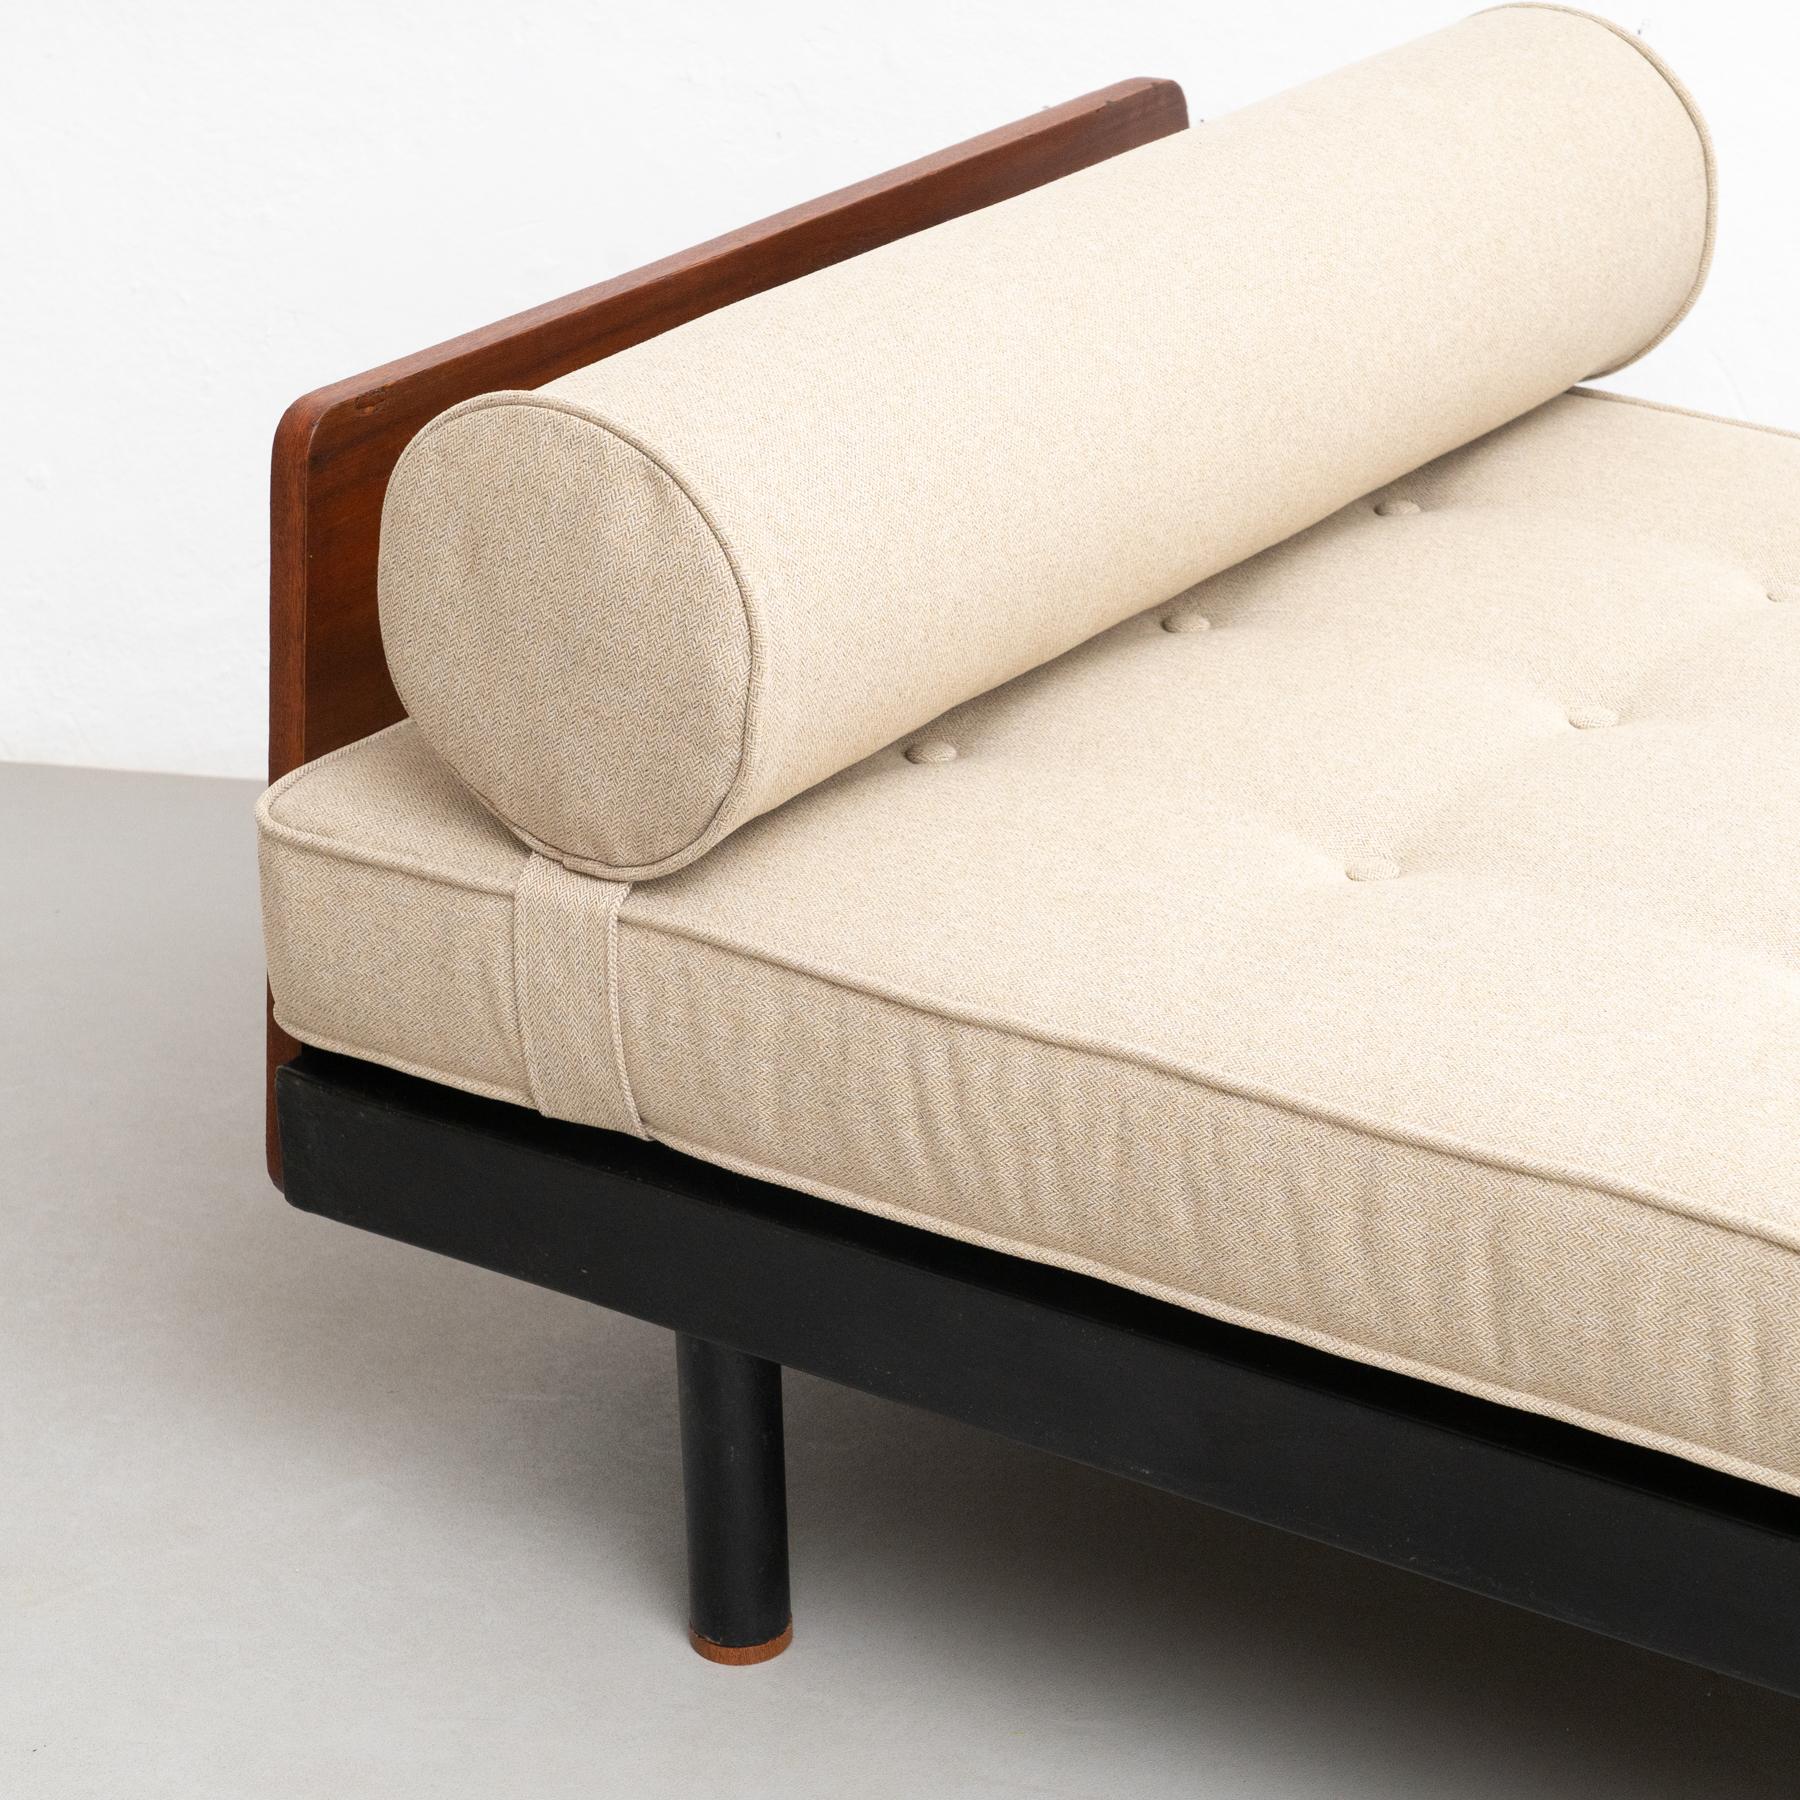 Jean Prouve Mid-Century Modern S.C.A.L. Daybed, circa 1950 8